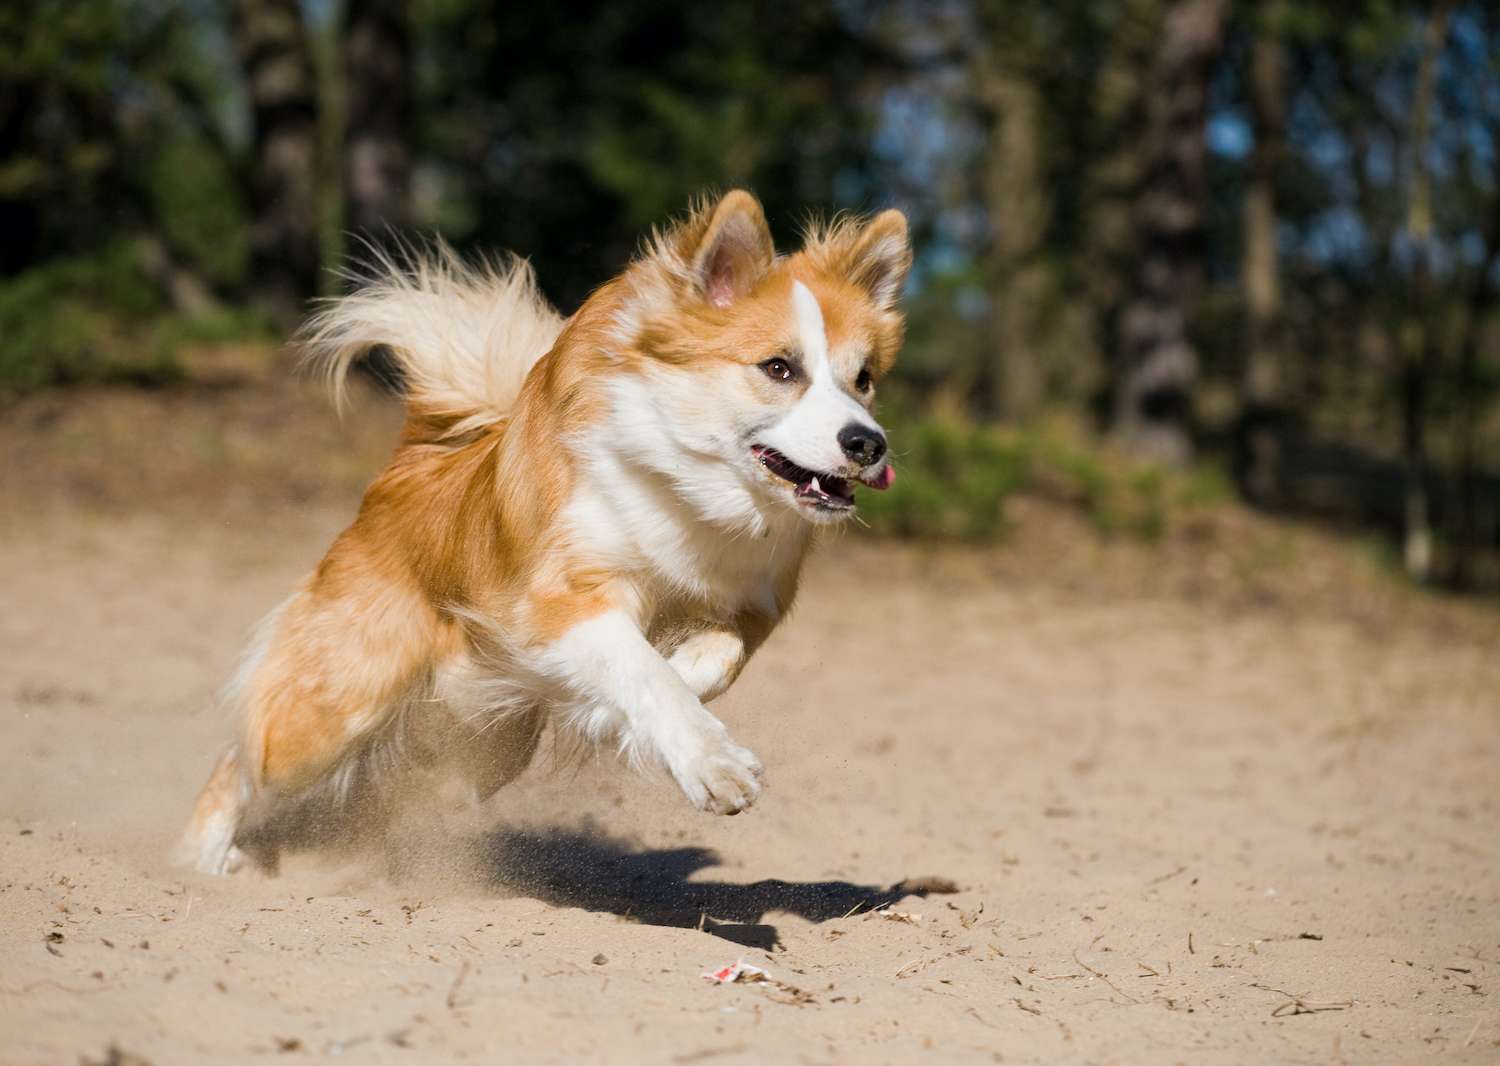 Young Icelandic sheepdog puppy running fast